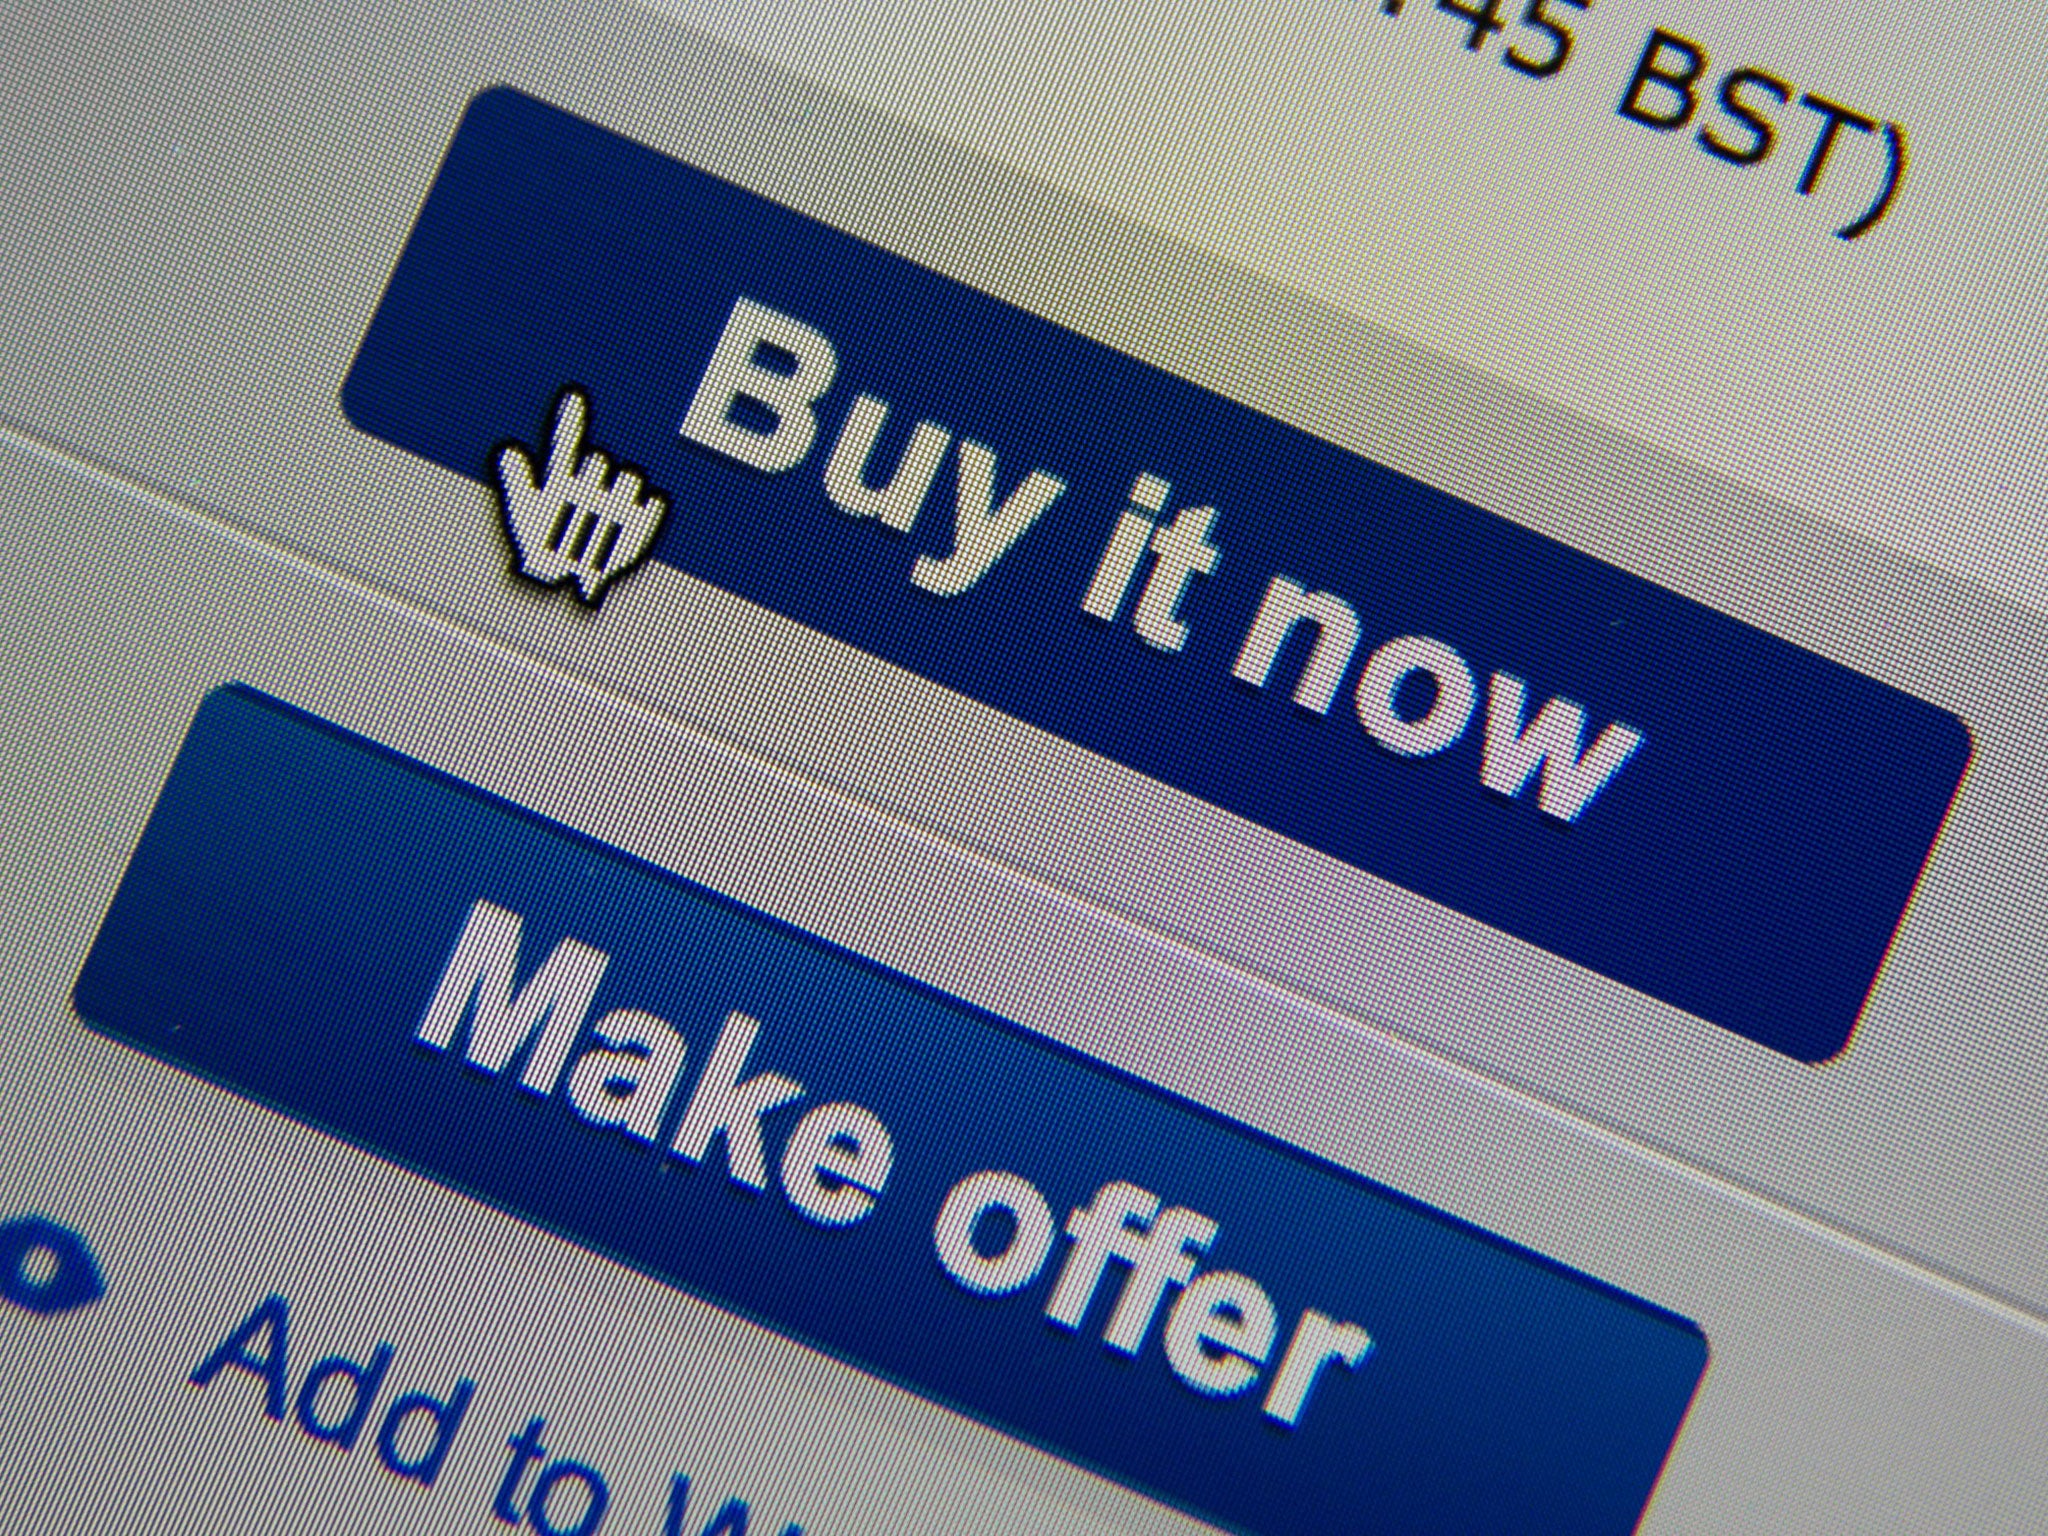 Short circuit: websites such as eBay stopped working this week due to the number of people
online